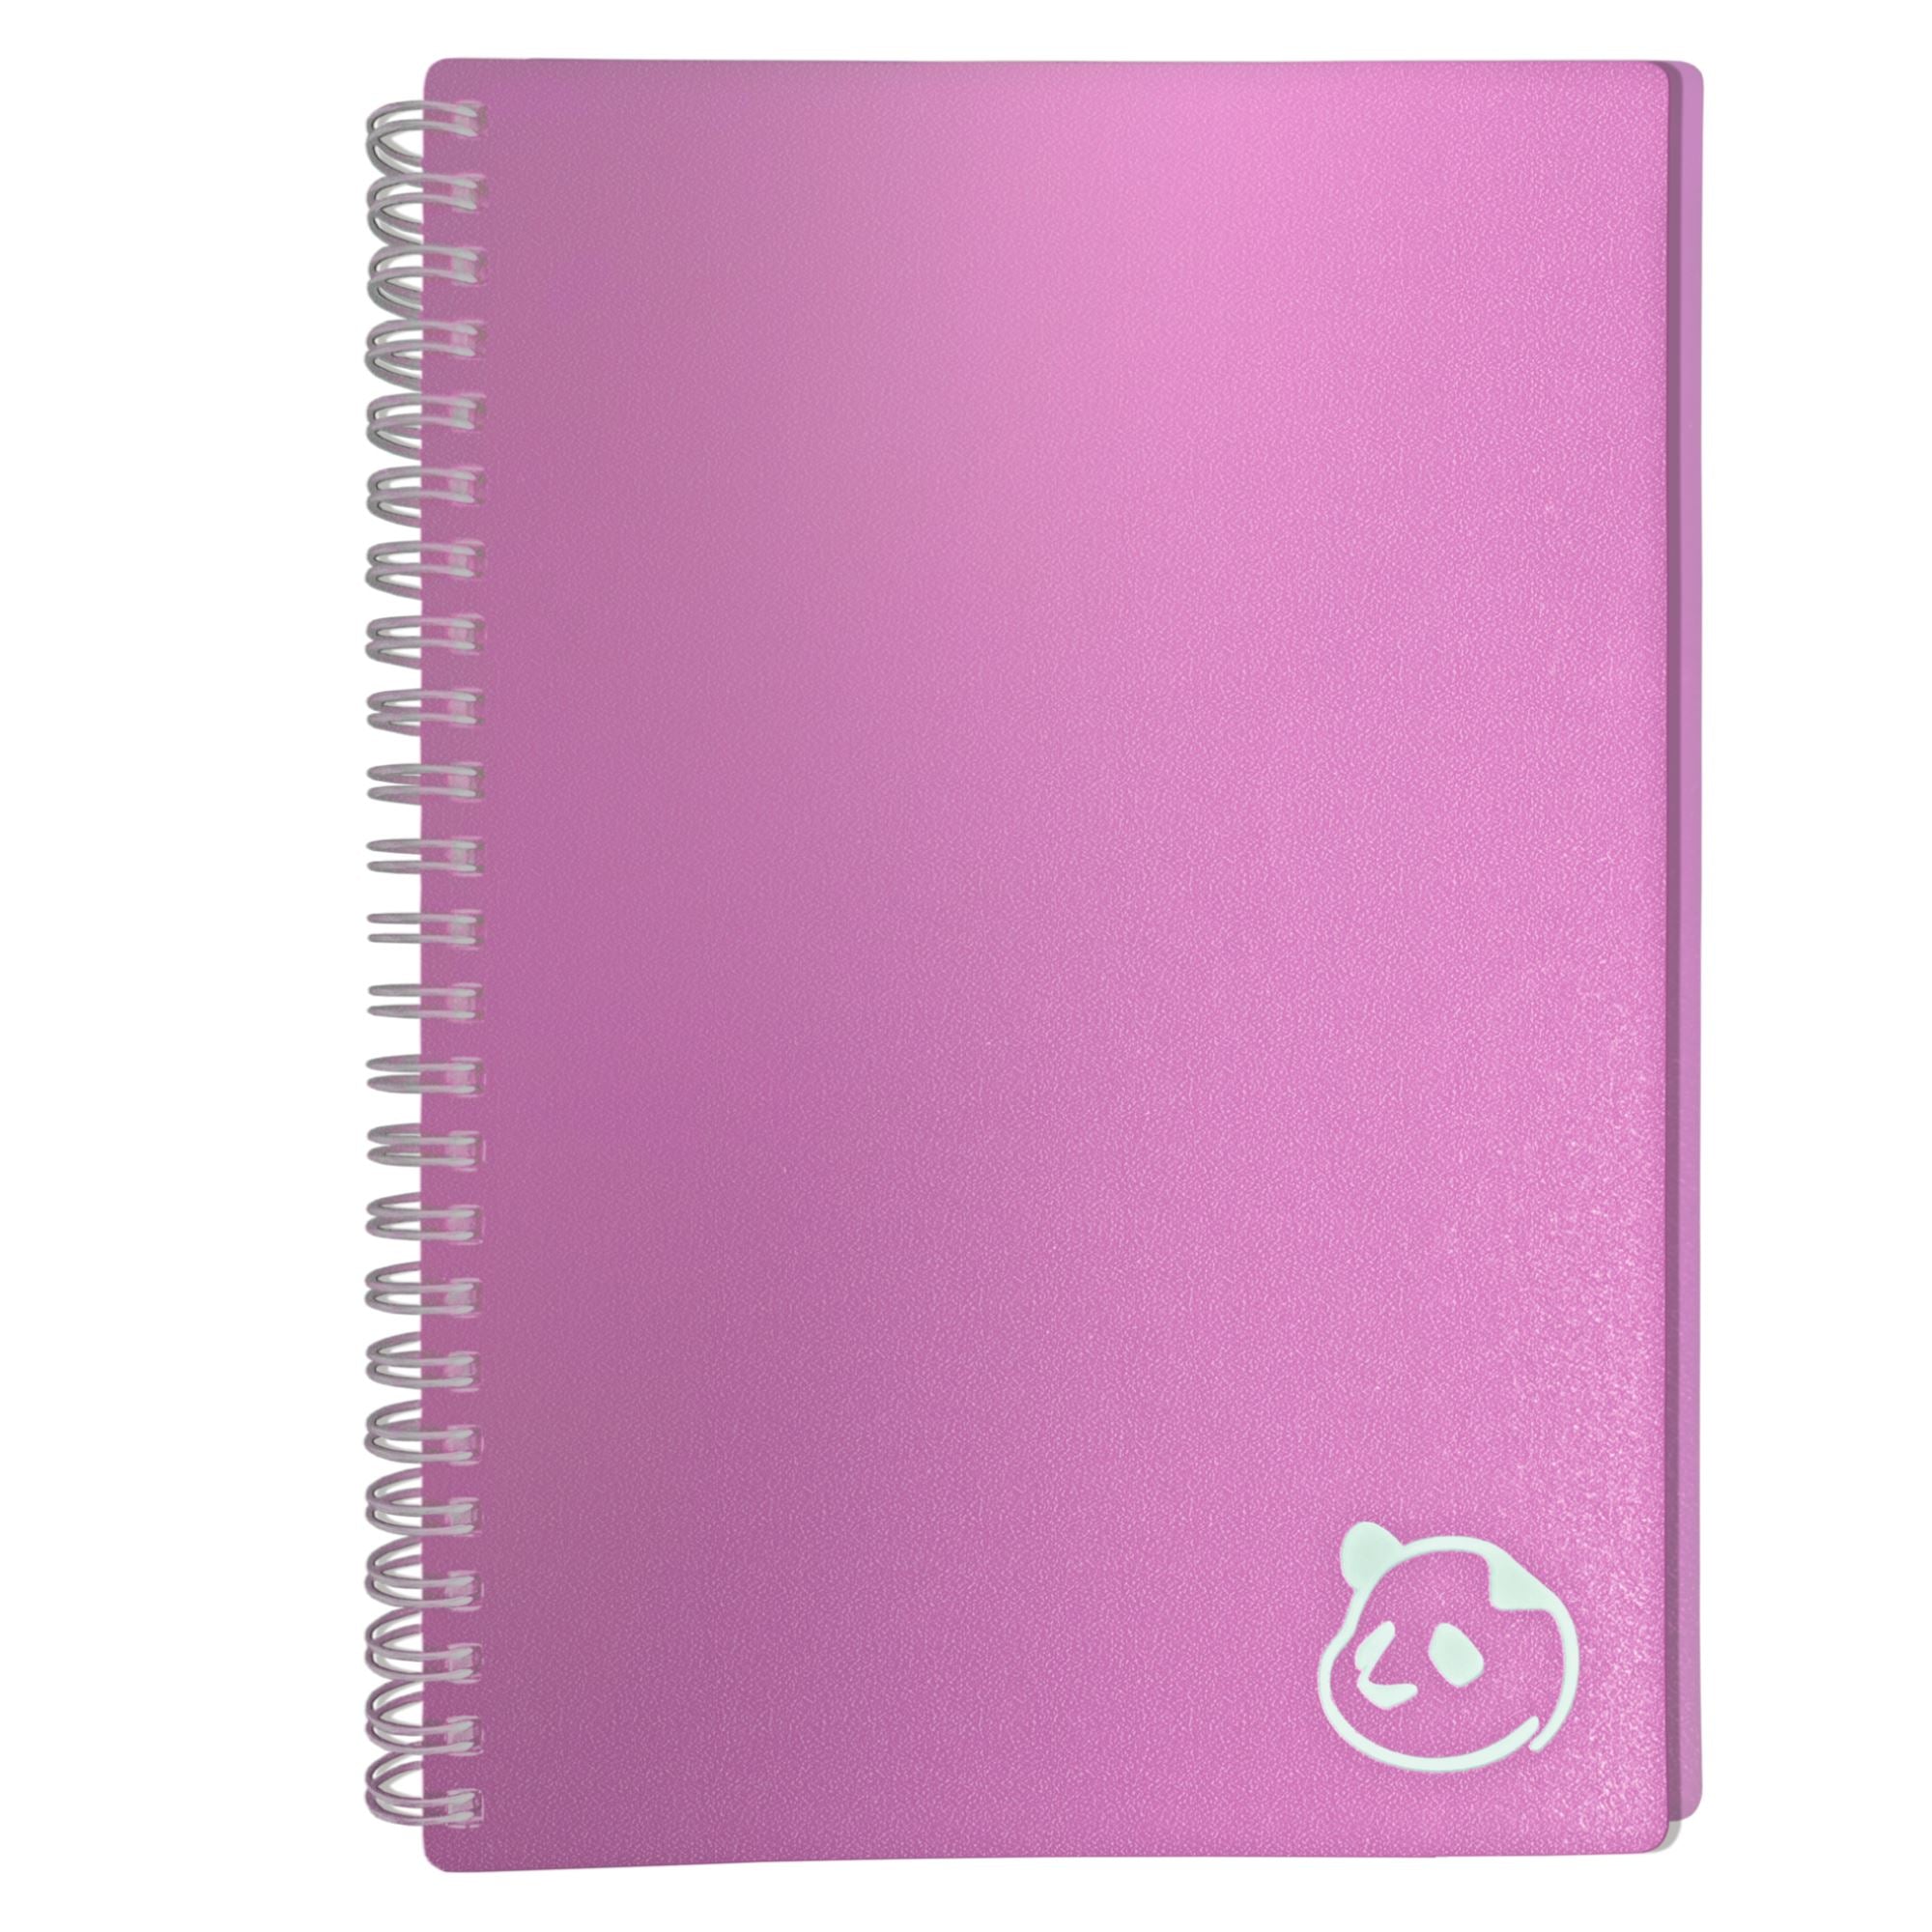 12 Month Weekly 2.0 – Monthly Calendar & Monday – Sunday Weekly Planning Weekly Planner 2.0 5.75" x 8.25" Undated Pink 